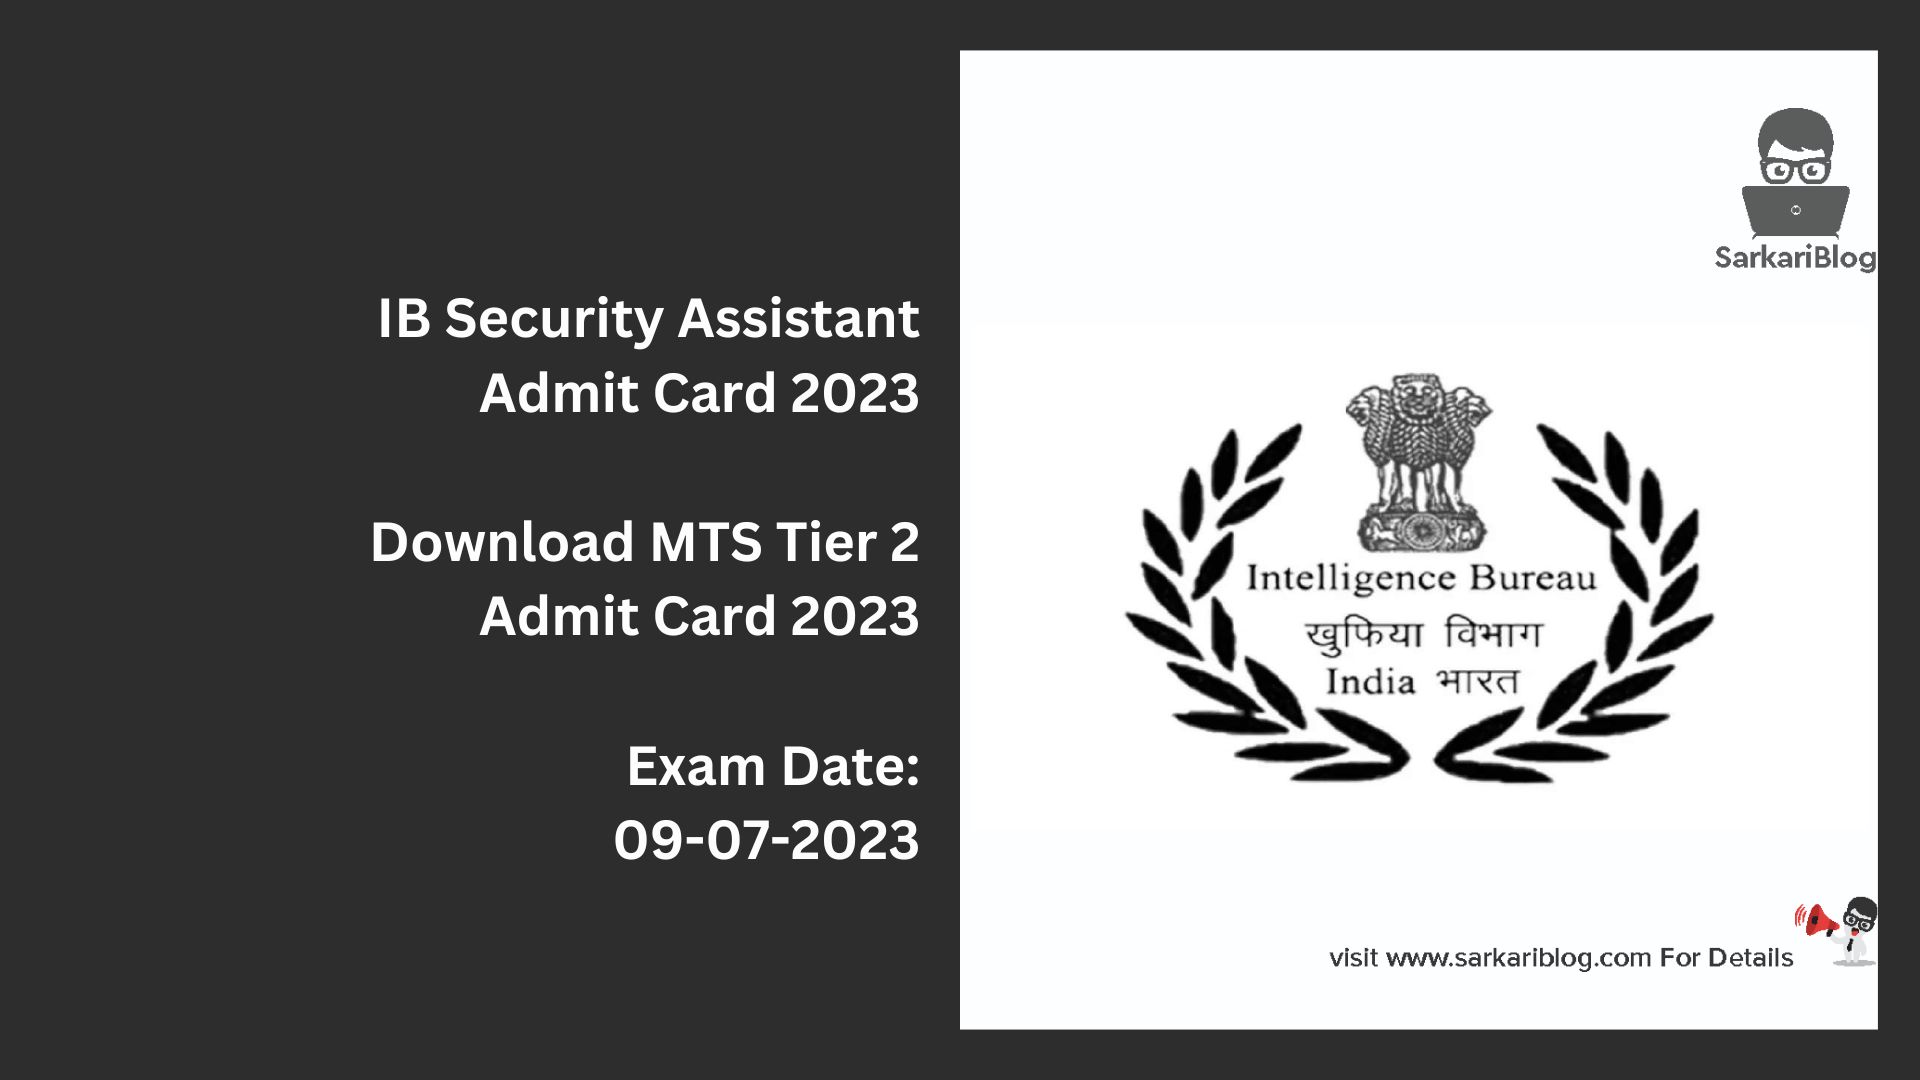 IB Security Assistant Admit Card 2023